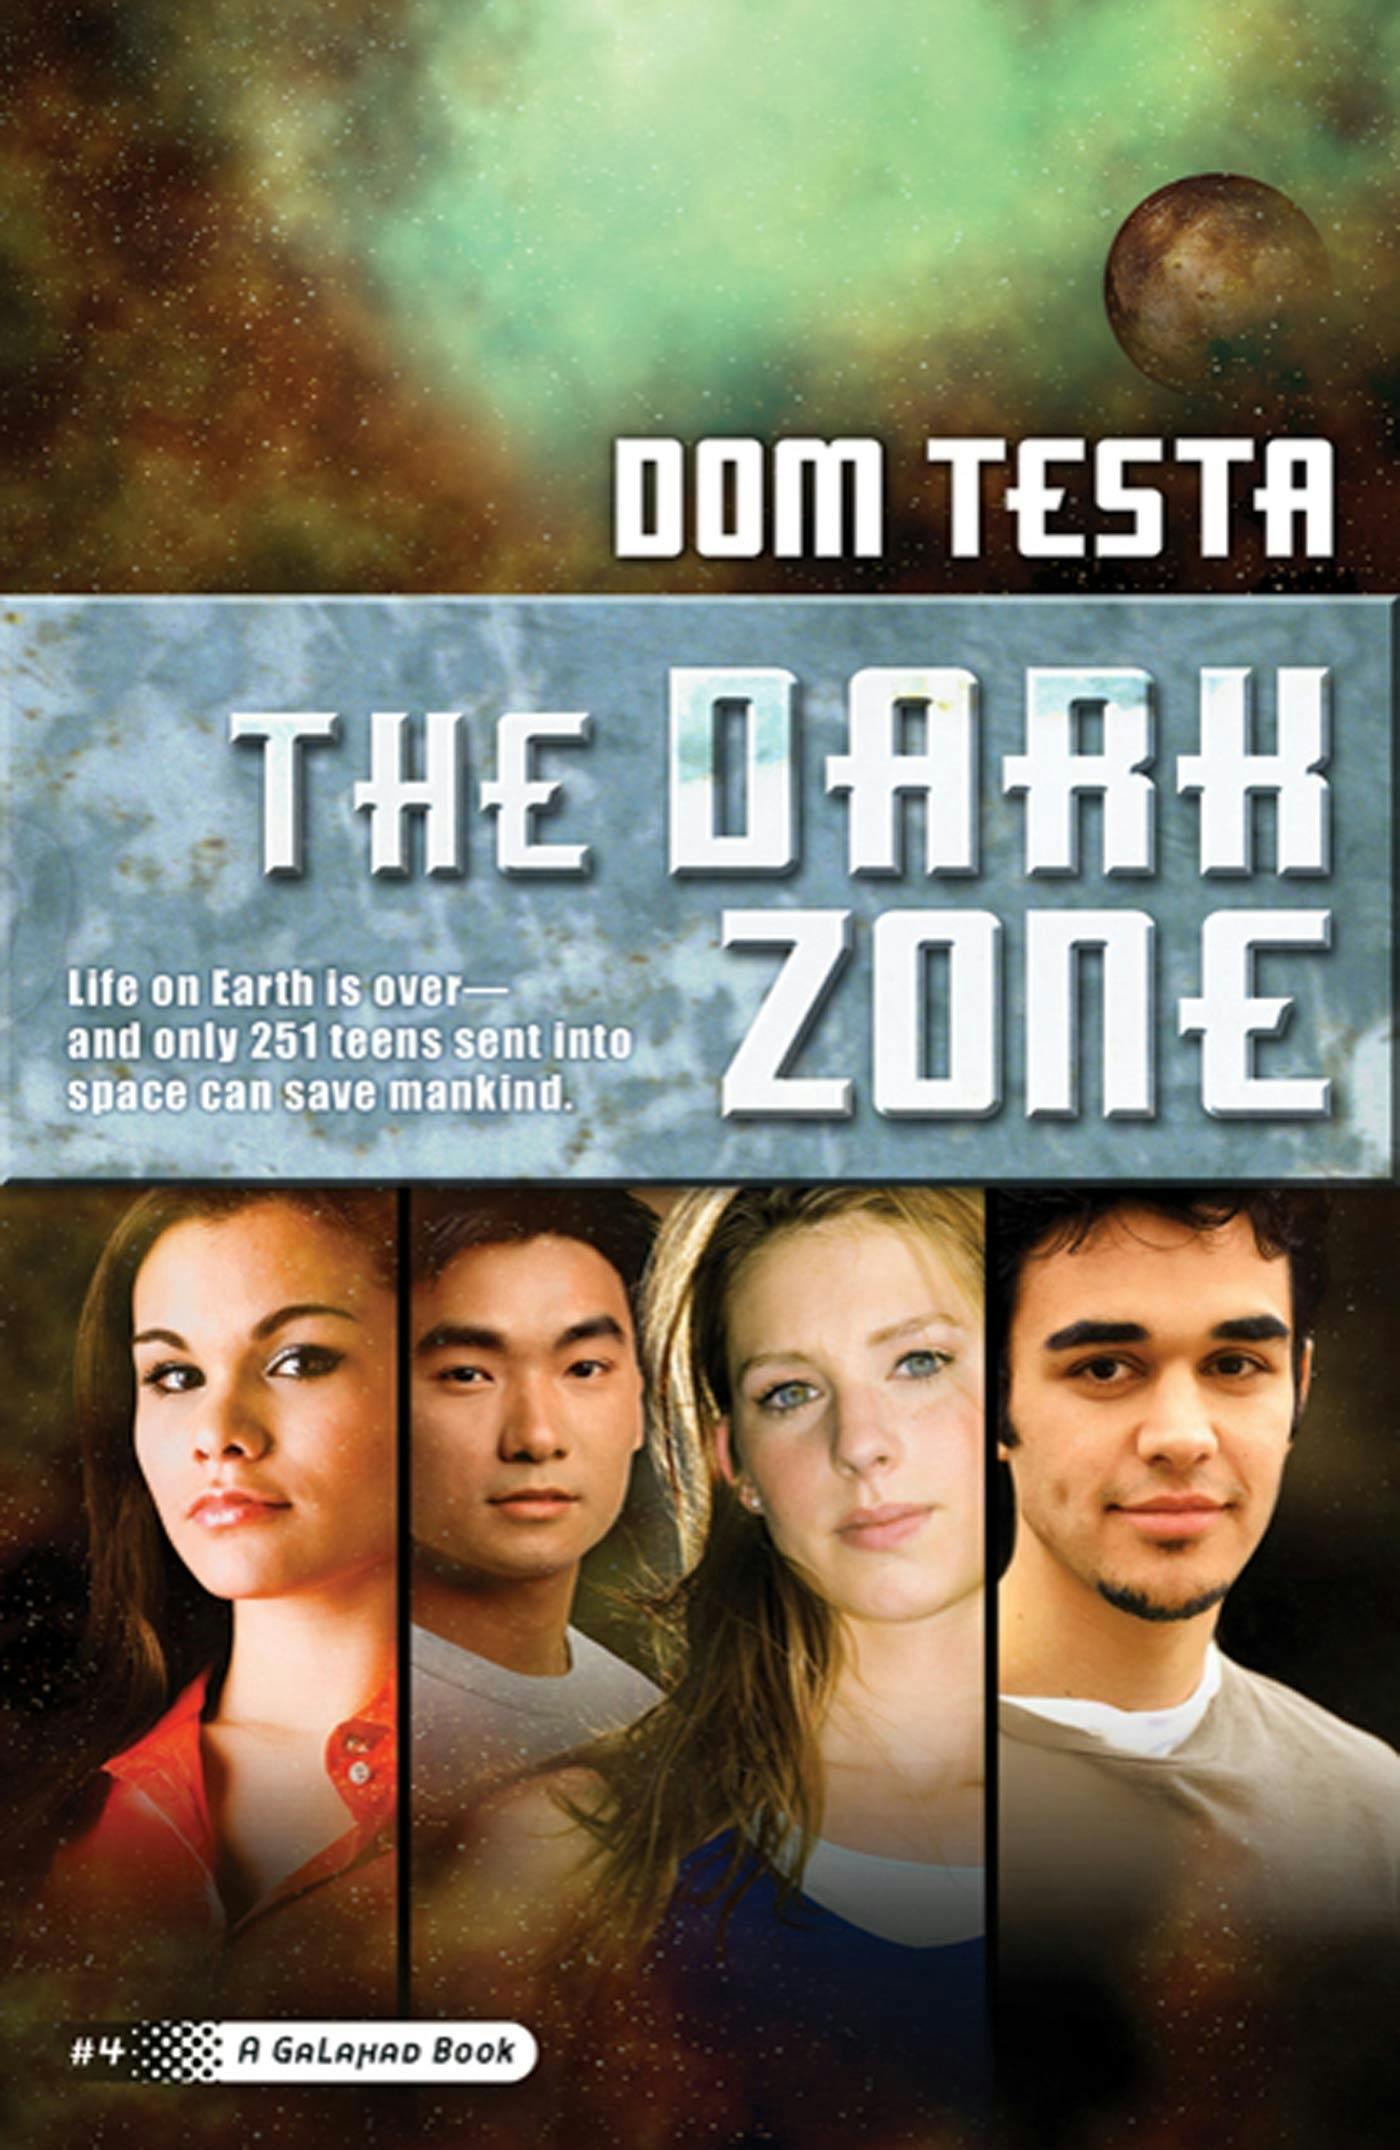 Cover for the book titled as: The Dark Zone